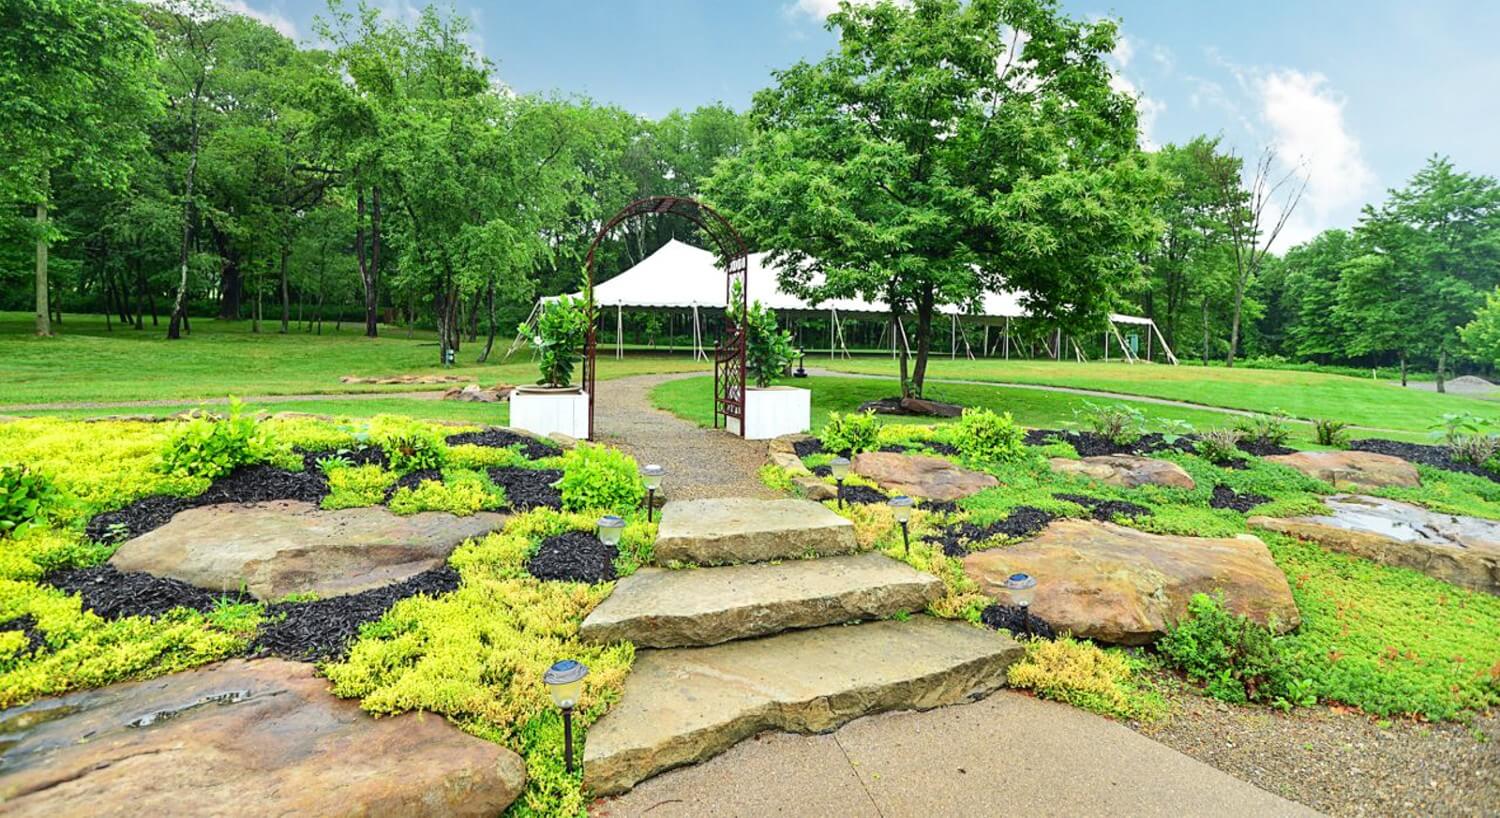 Decorative stone walkway leading up to an arch with an outdoor event tent and trees in the background